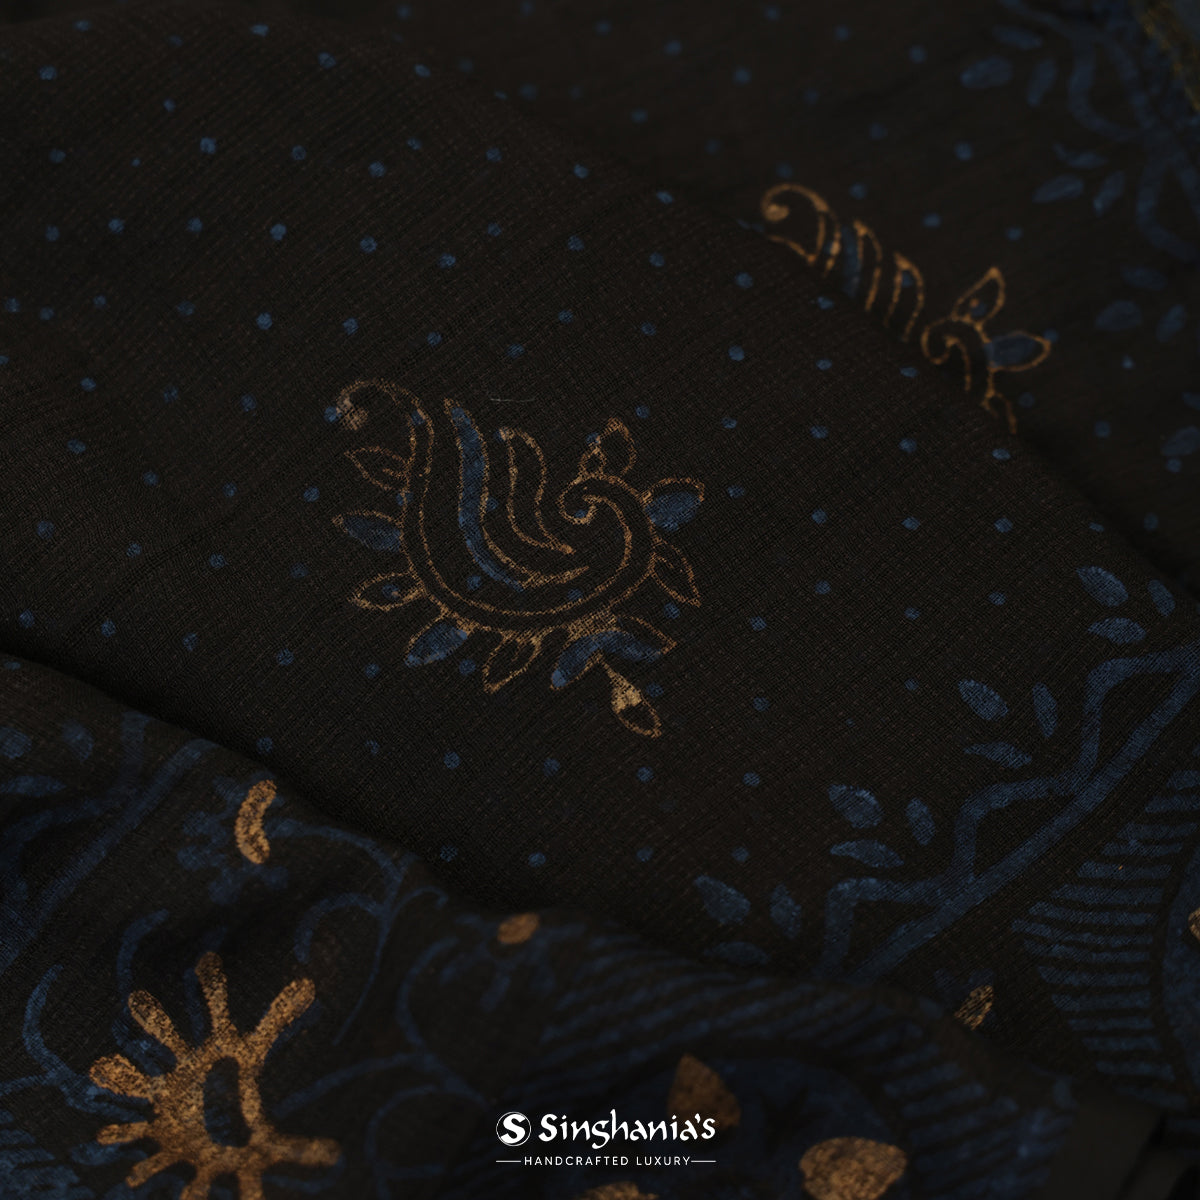 Black Printed Silk Saree With Floral Butti Pattern